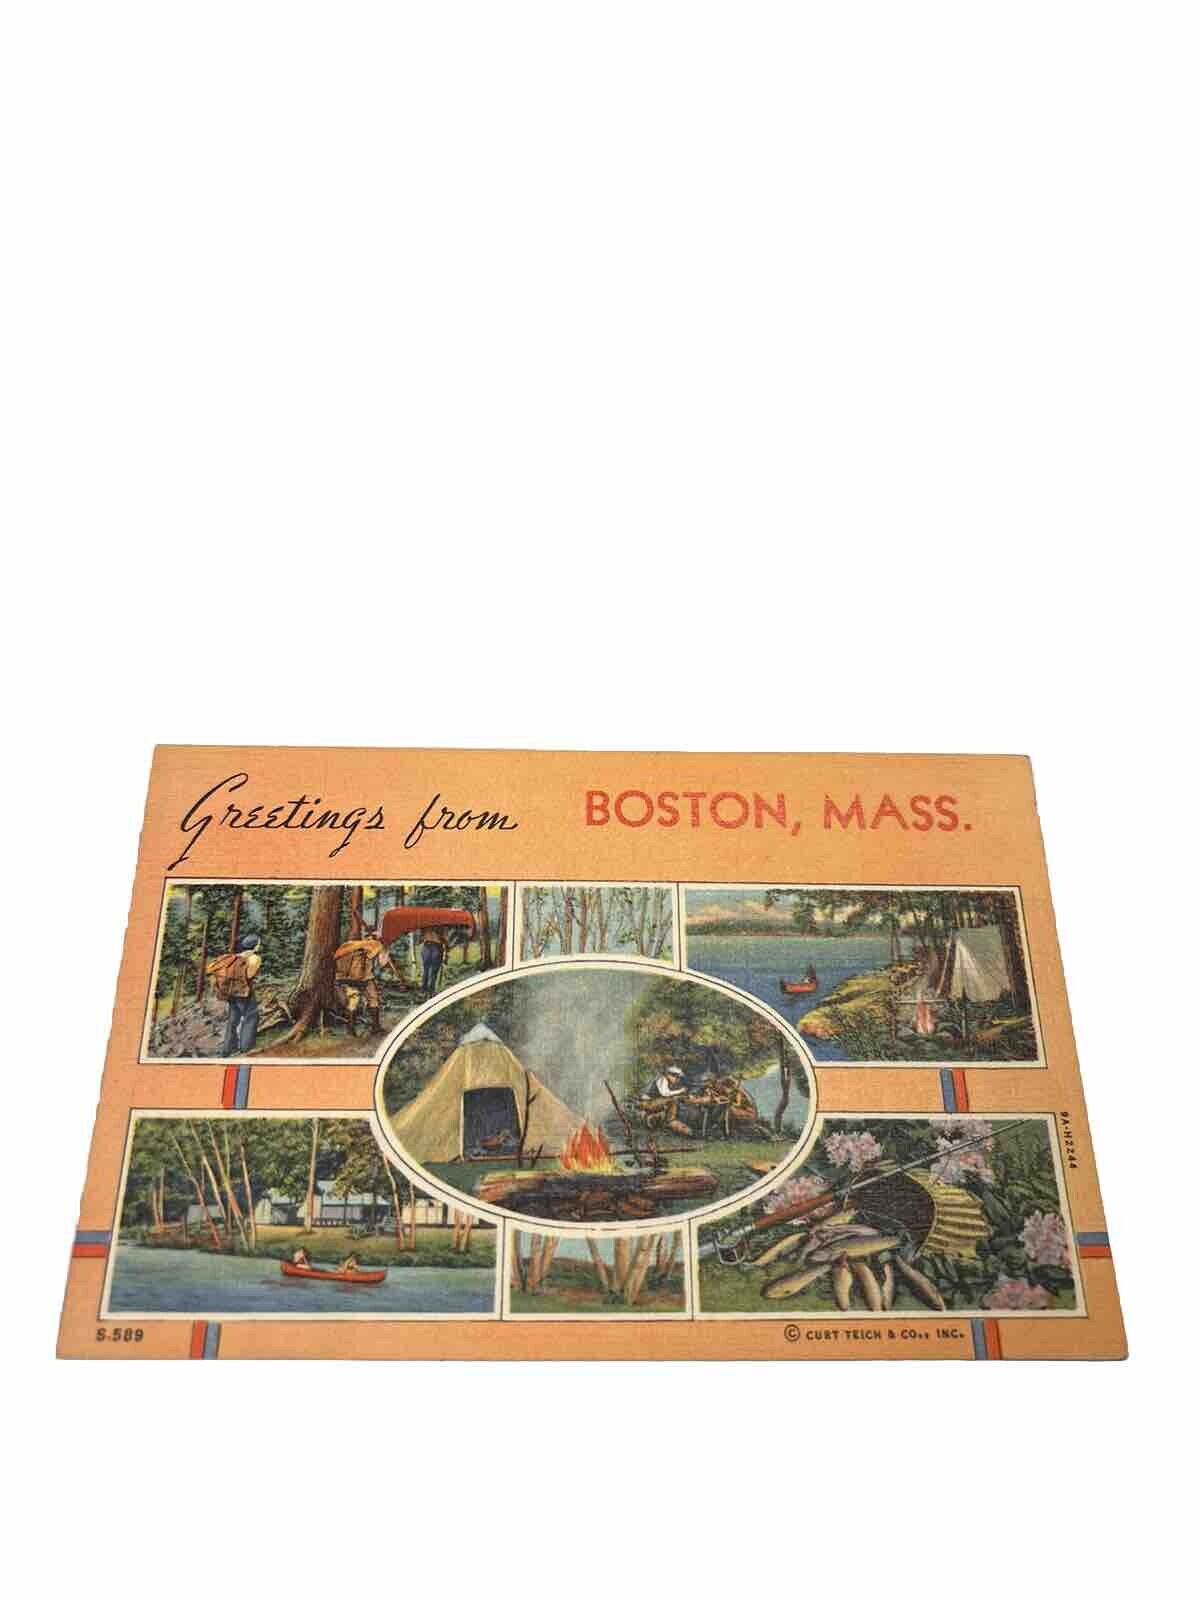 Greetings From Boston, Mass. Old Vintage Travel Postcard Linen 1930-1945, S589.